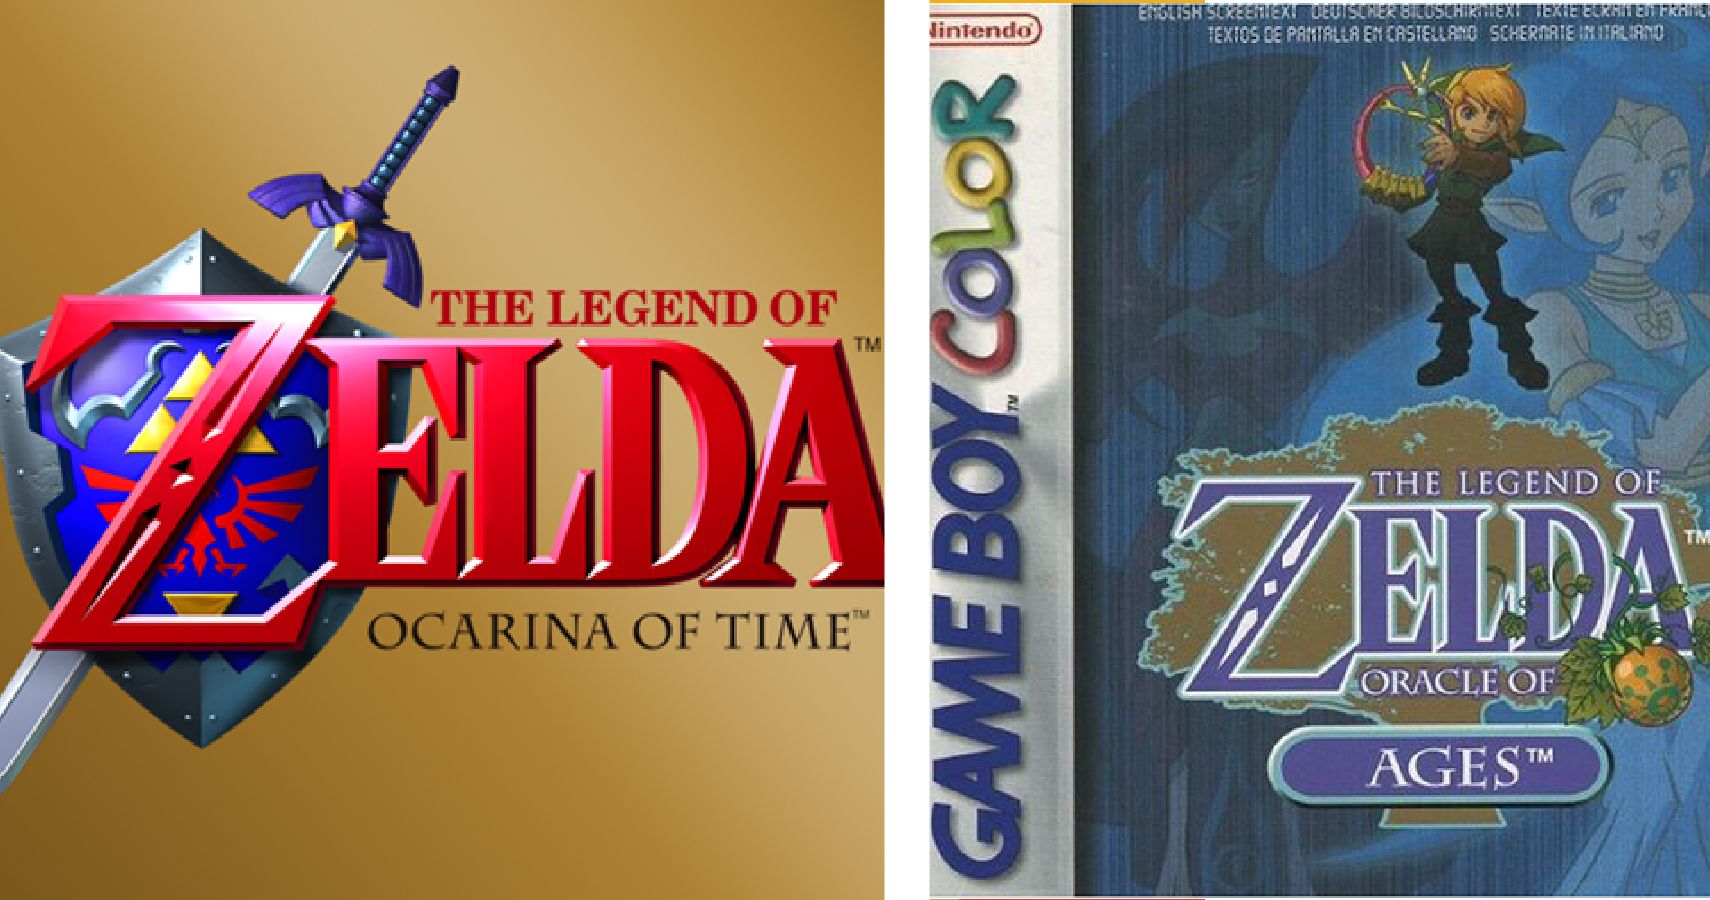 Ocarina of Time and Oracle of Ages Cover Art